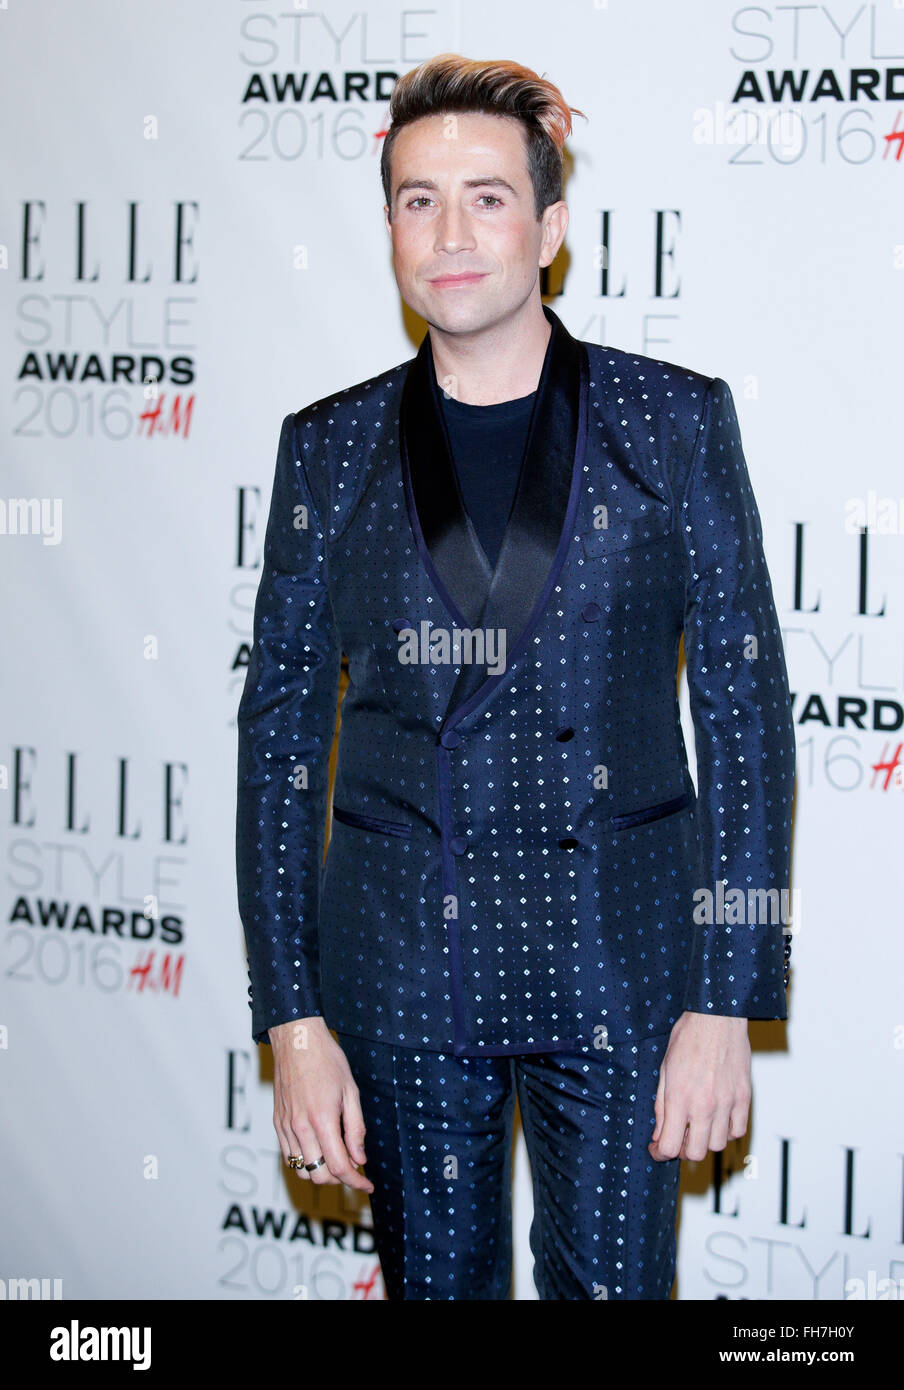 London, UK. 23rd February, 2016. TV personality Nick Grimshaw arrives at the Elle Style Awards in London, England, on 23 February 2016. Credit:  dpa picture alliance/Alamy Live News Stock Photo